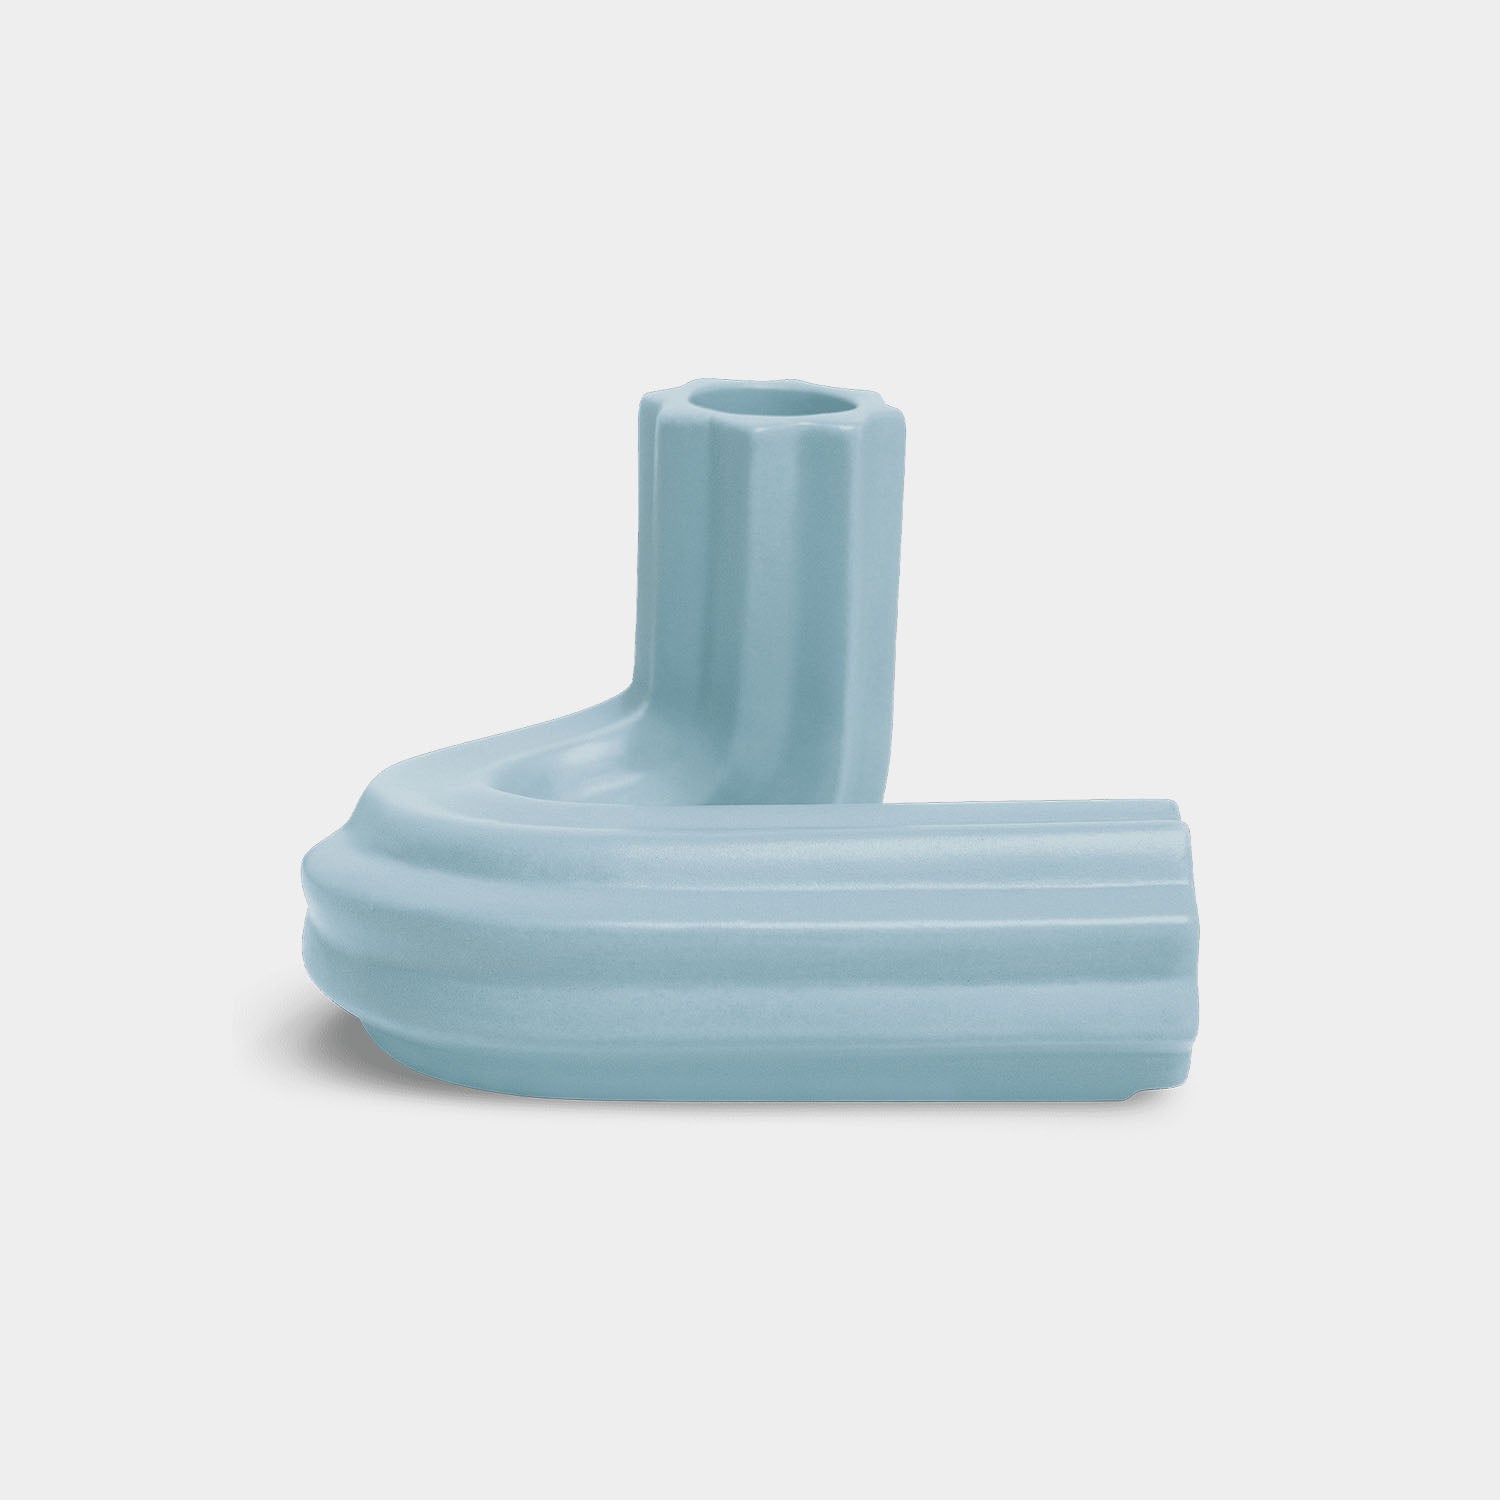 Templo Candle Holder in light blue by OCTAEVO